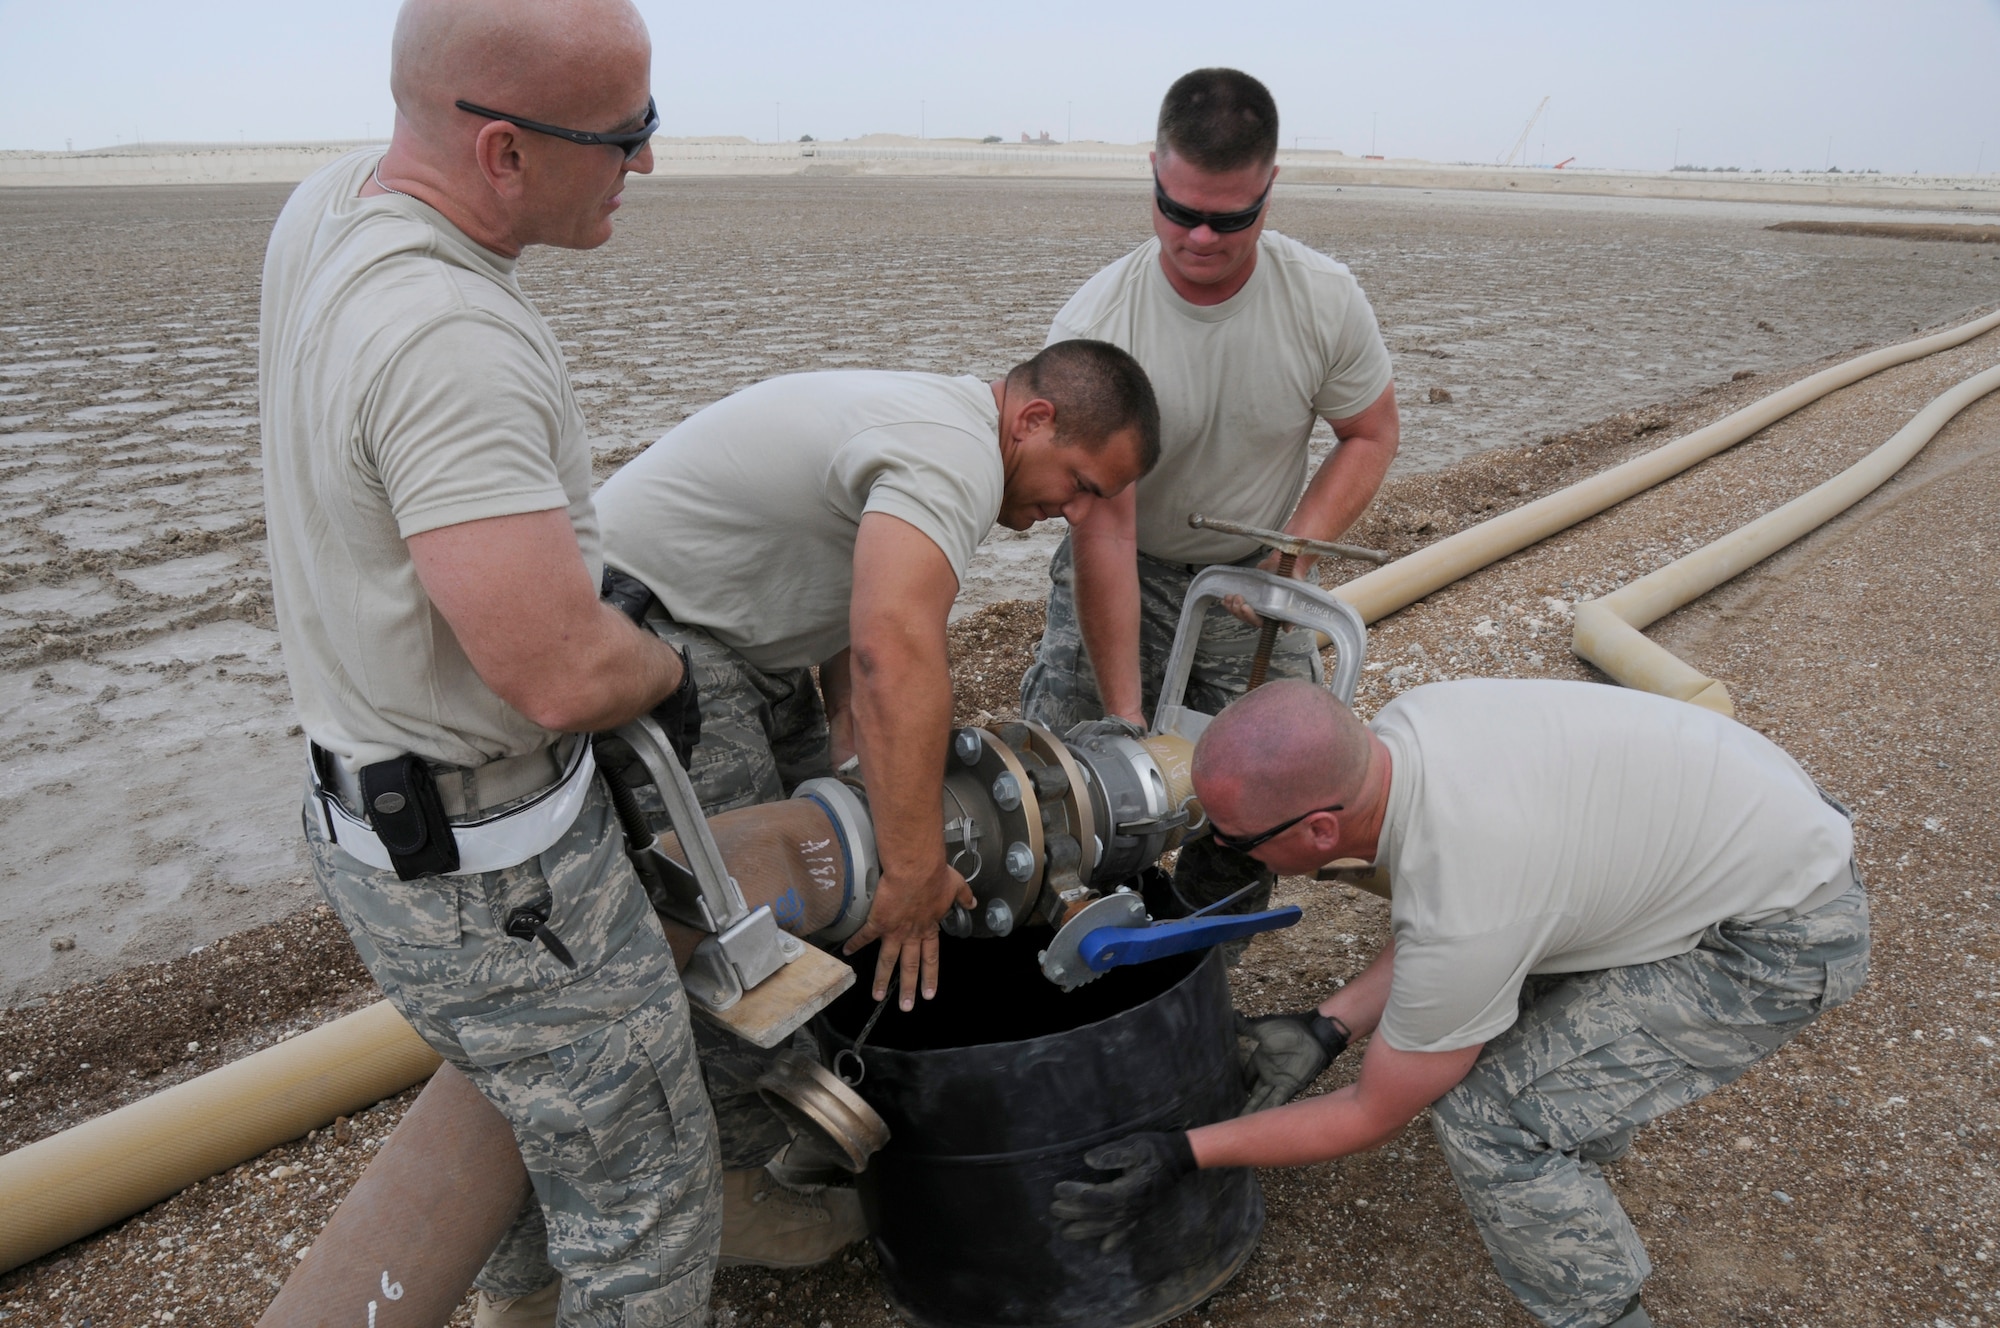 SOUTHWEST ASIA - Chief Master Sgt. George Treleor, Tech Sgt. David Butts, Staff Sgt. Joshua Schubert and Tech. Sgt. Ron Evenson, 380th Expeditionary Logistics Readiness Squadron, fuels flight, position a fuel line to be disconnected and drained of residual, Feb 7. The fuels flight upgraded the fuel line named "python", changing out 5000ft, upgrading the old worn line ensuring a steady flow of fuel to the base. The fuels flight will replace an additional 3000ft within the next few weeks. Chief Treleor, Sergeant Shubert and Sergeant Evenson are deployed from Eglin AFB, Fla. and Sergeant Butts is deployed from Nellis AFB, Nev. Chief Treleor hails from Philadelphia, Pa., Sergeant Butts is from Las Vegas, Nev., Sergeant Shubert is from Hatboro, Pa. and Sergeant Evenson is from Lena, Ill. (U.S. Air Force photo by Senior Airman Brian J. Ellis) (Released)